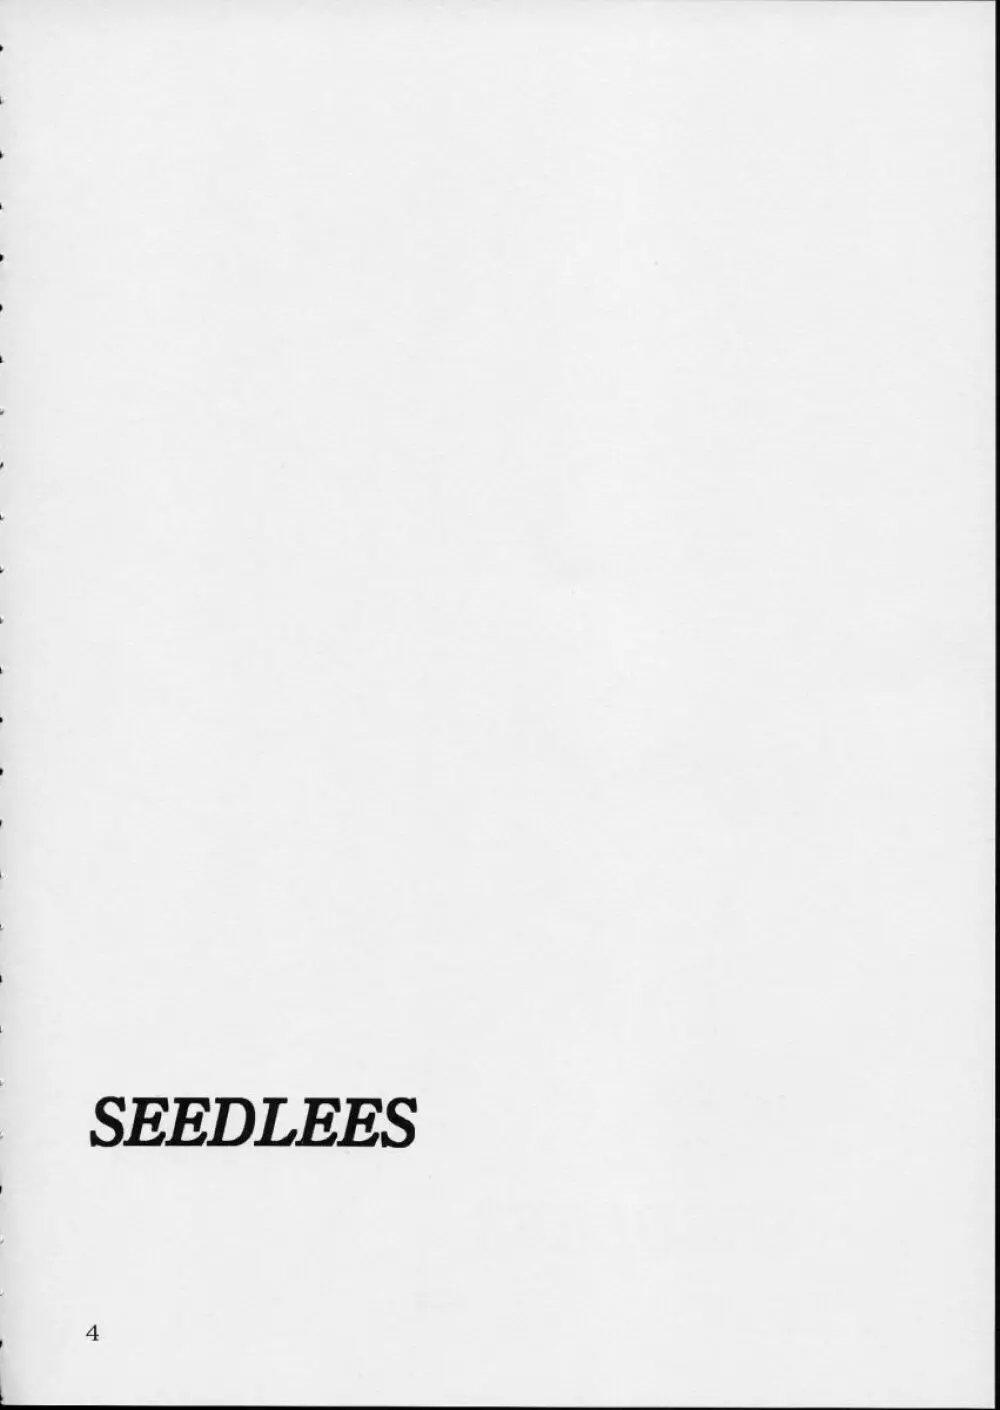 Seedless Page.4